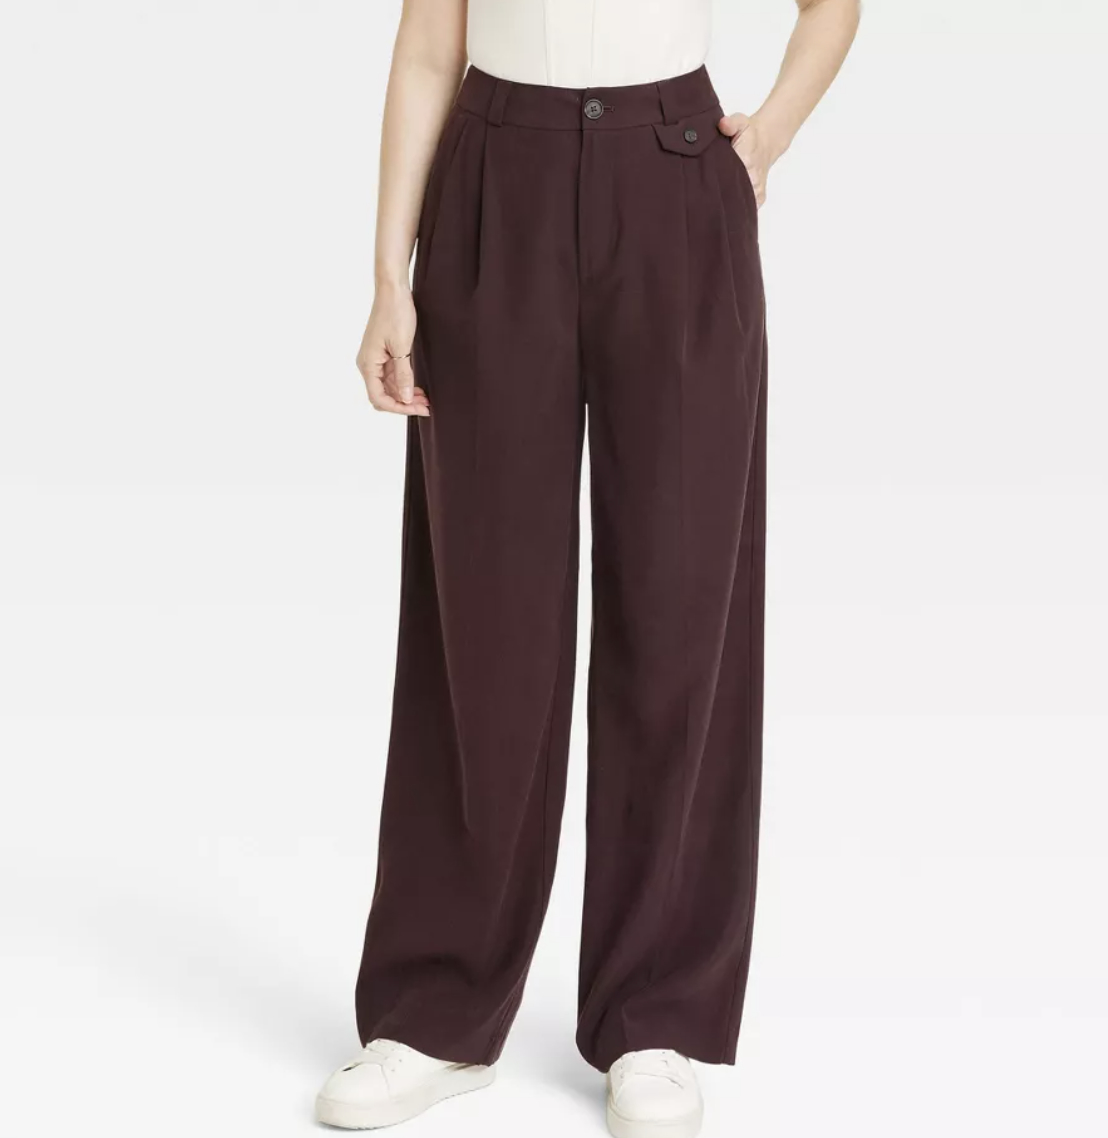 A pair of brown wide leg trousers